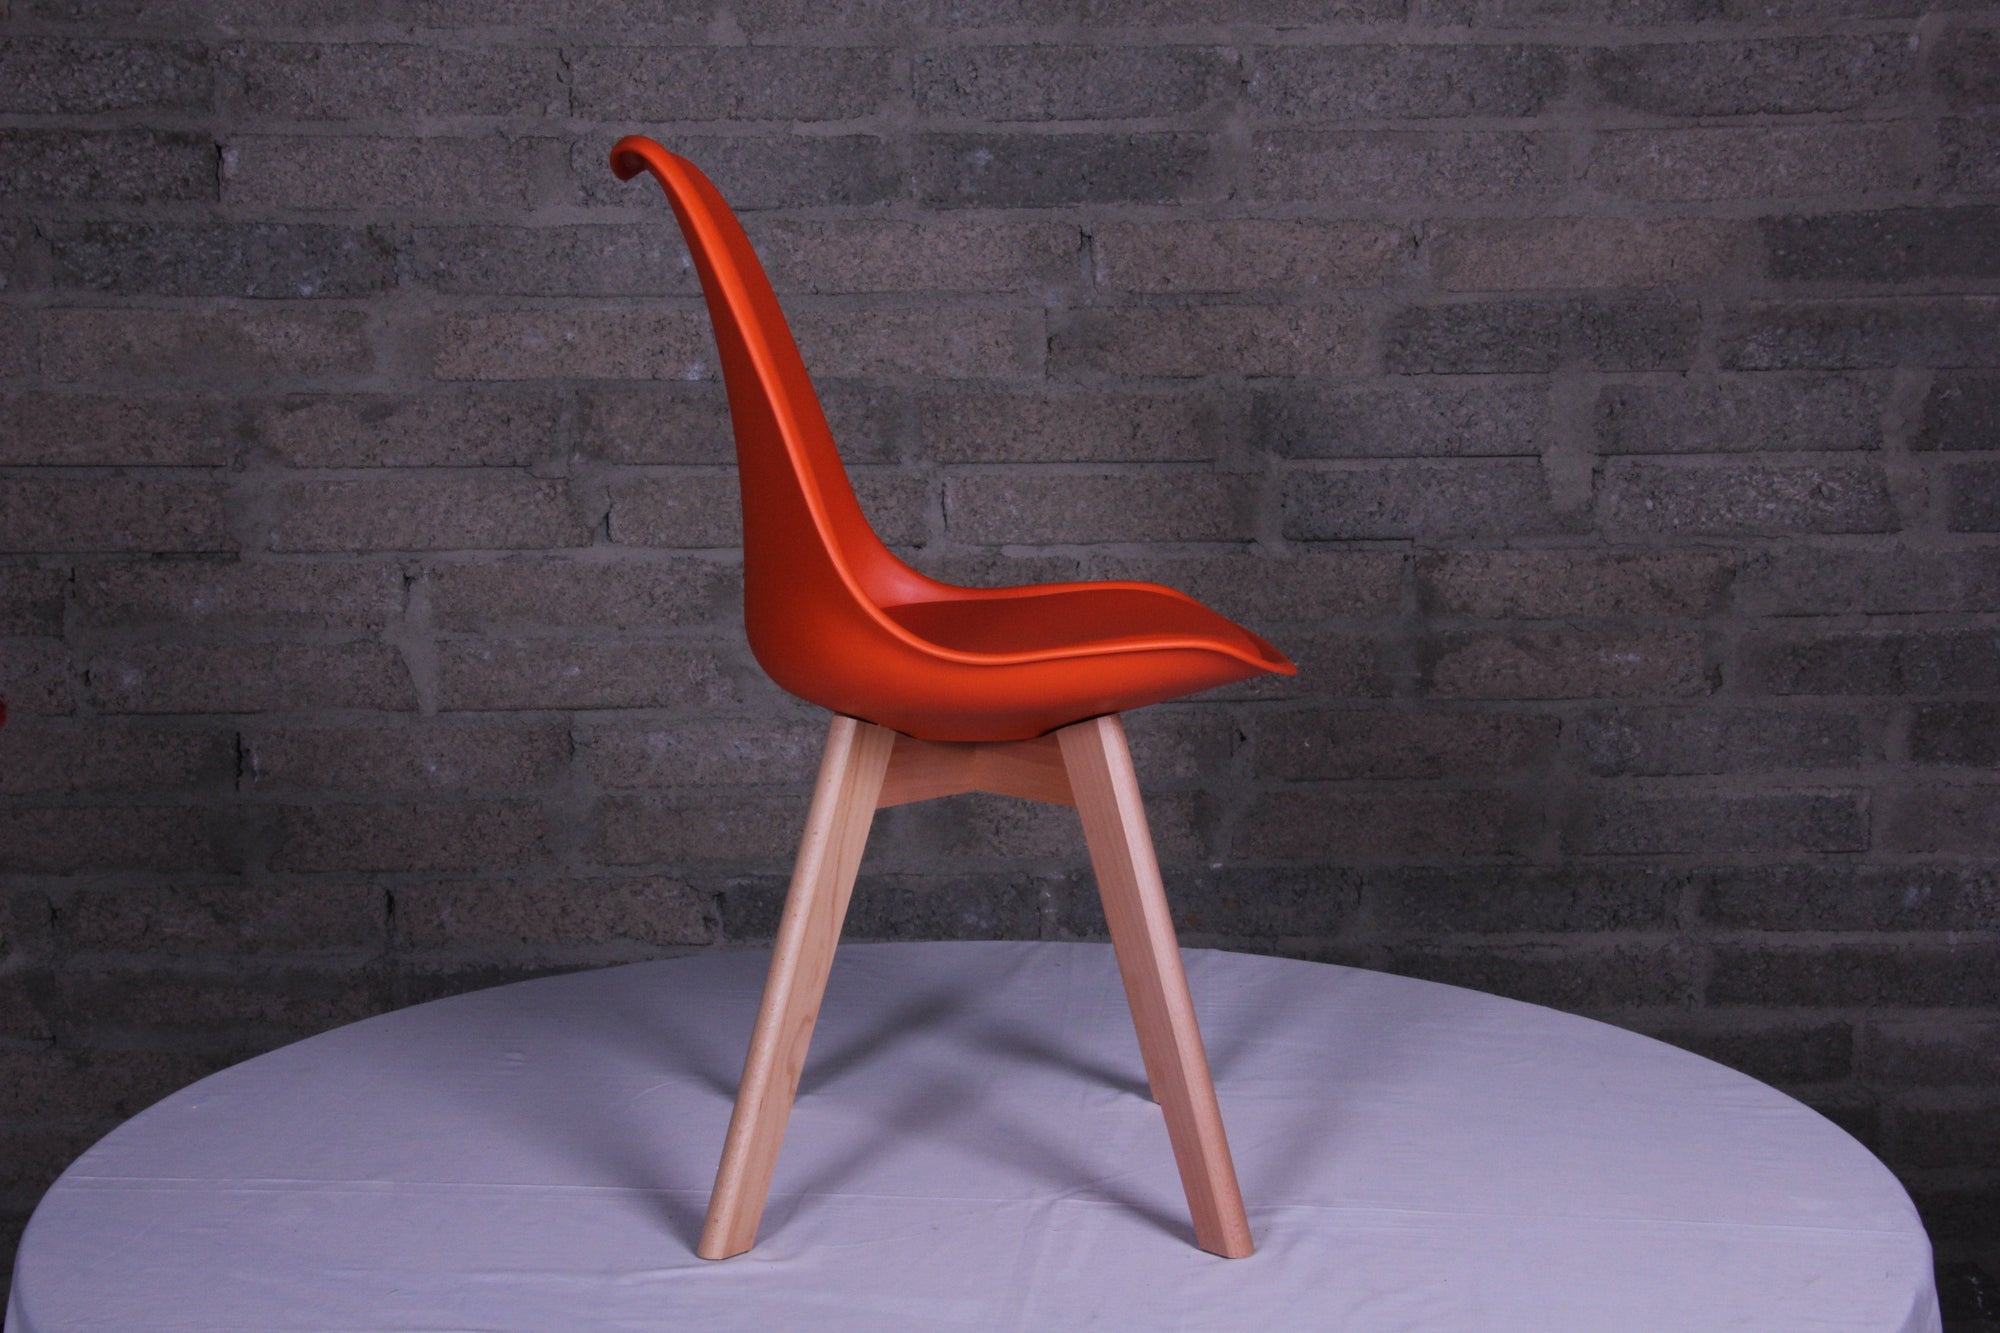 Eames Style Dining Chairs Orange with padded seat - Fervor + Hue